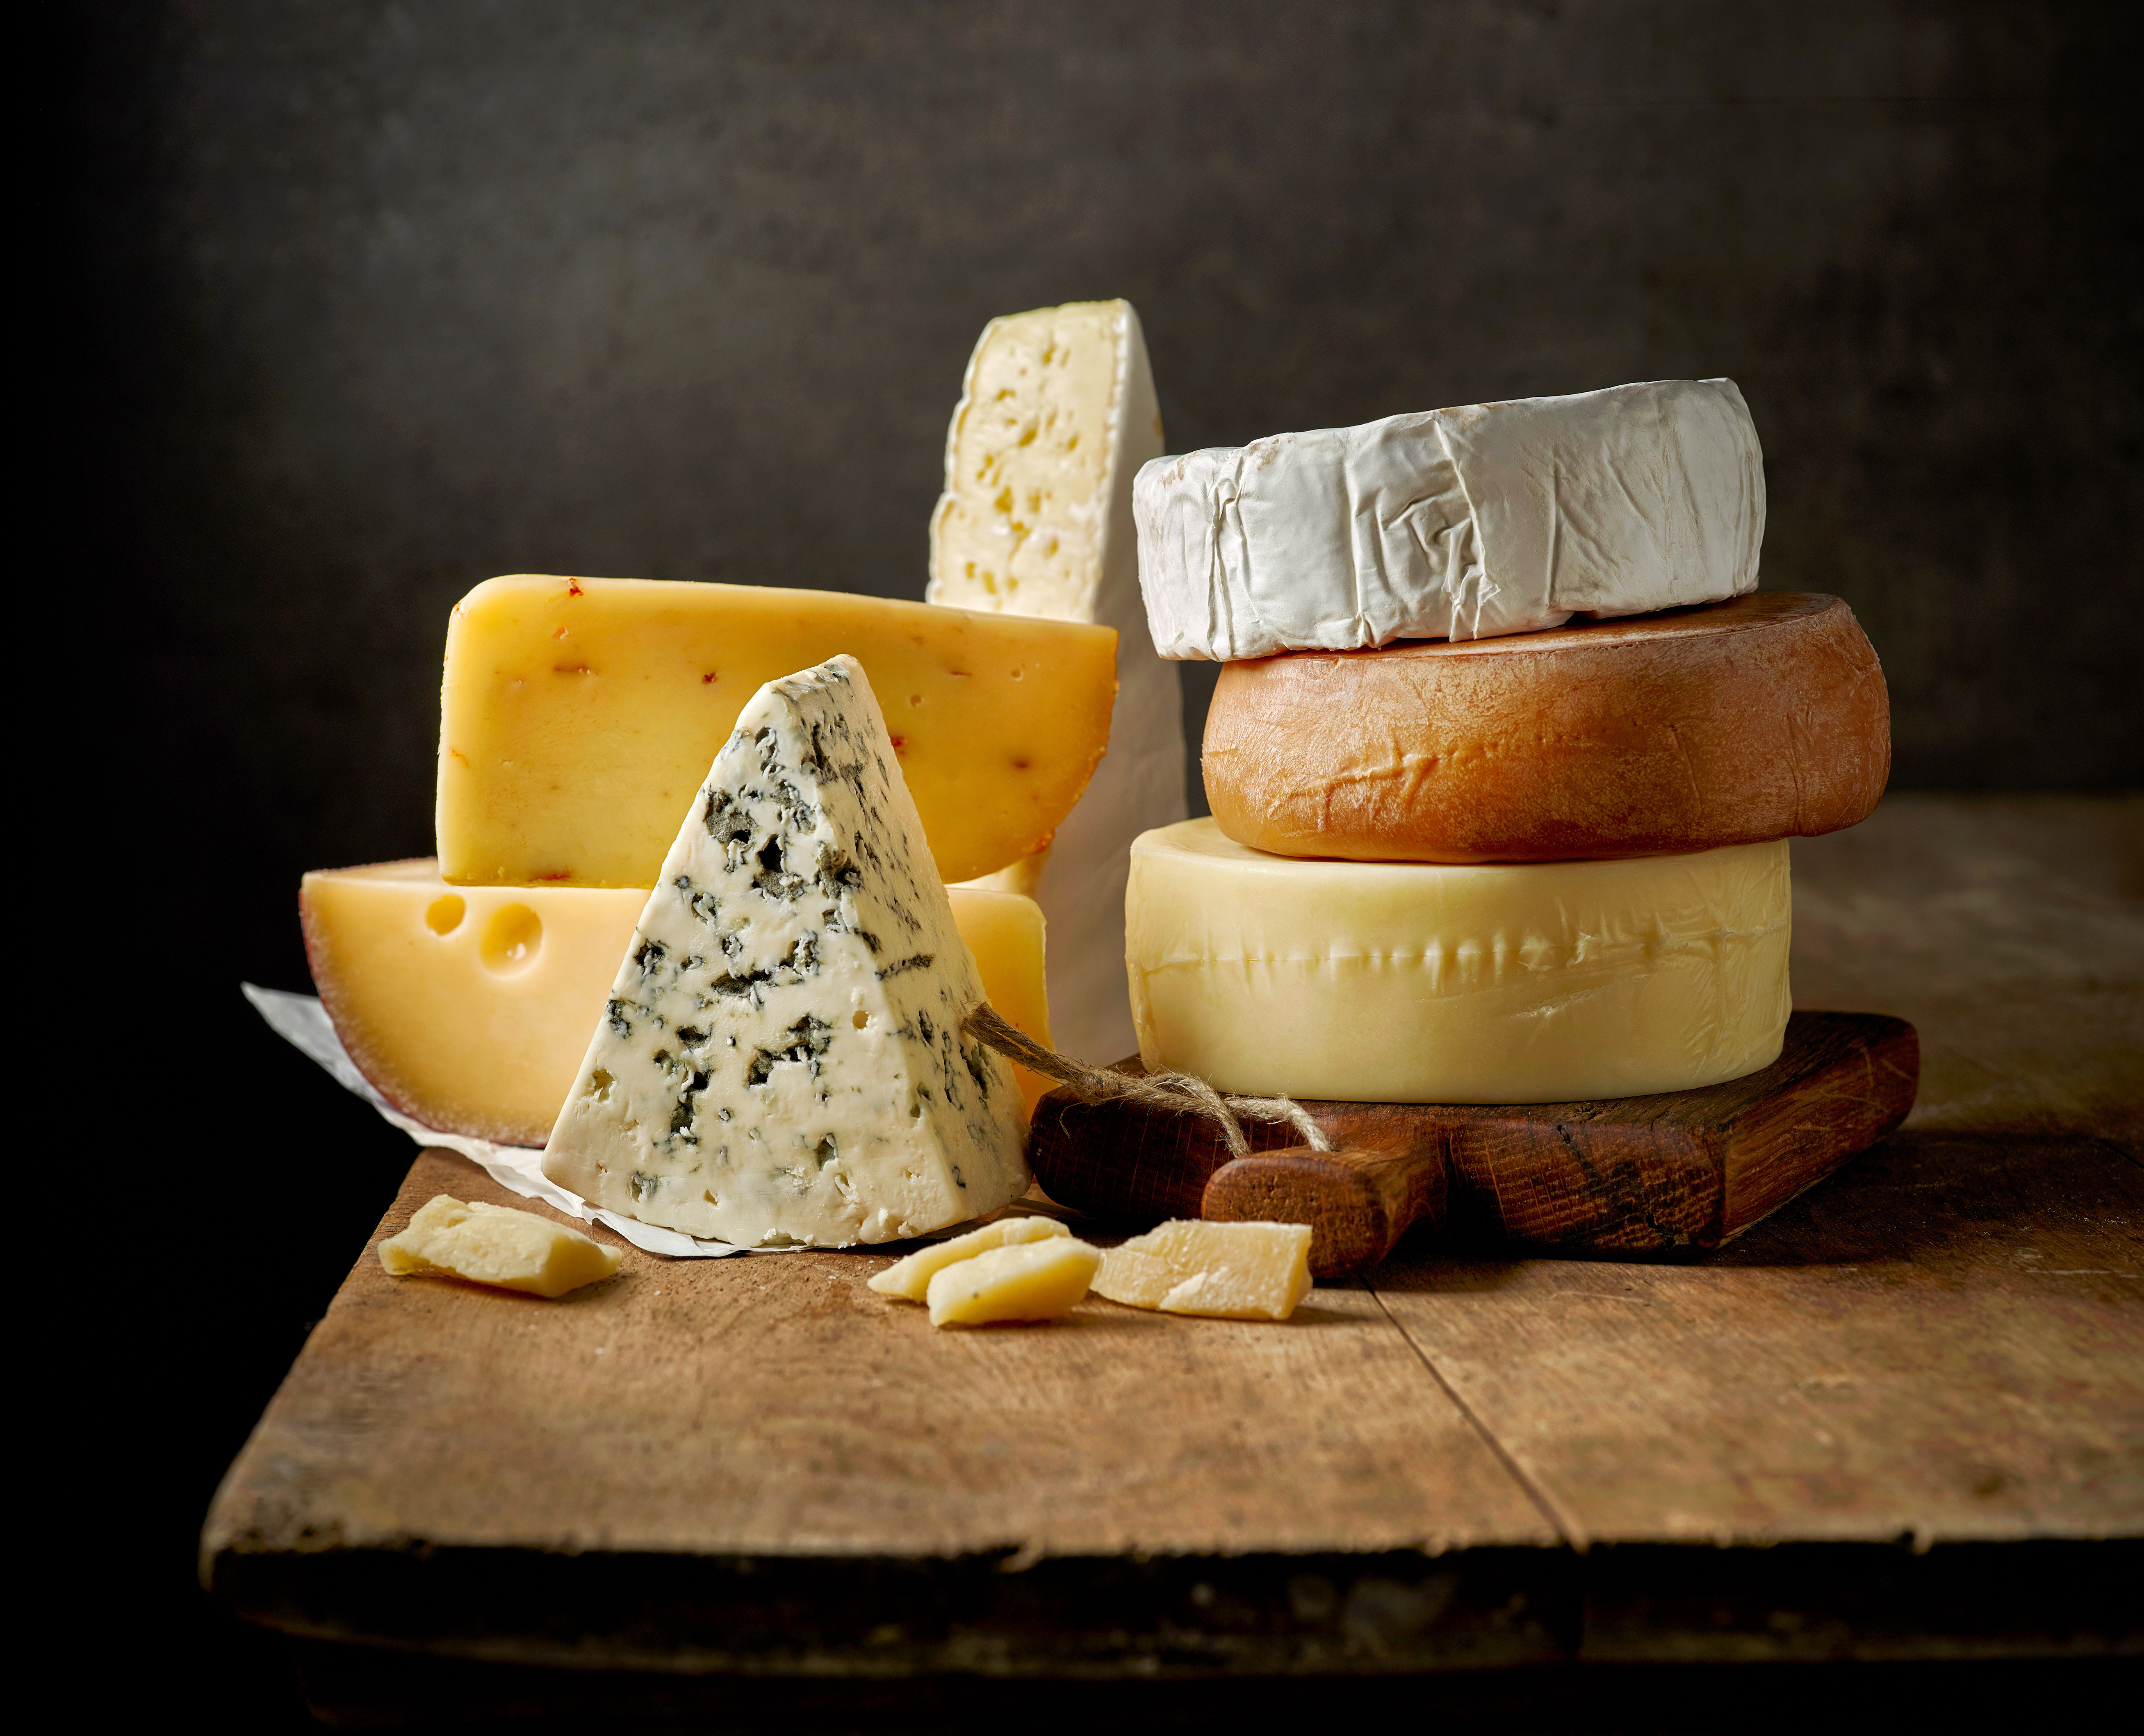 Bridge Cheese says food exports are set to grow post pandemic